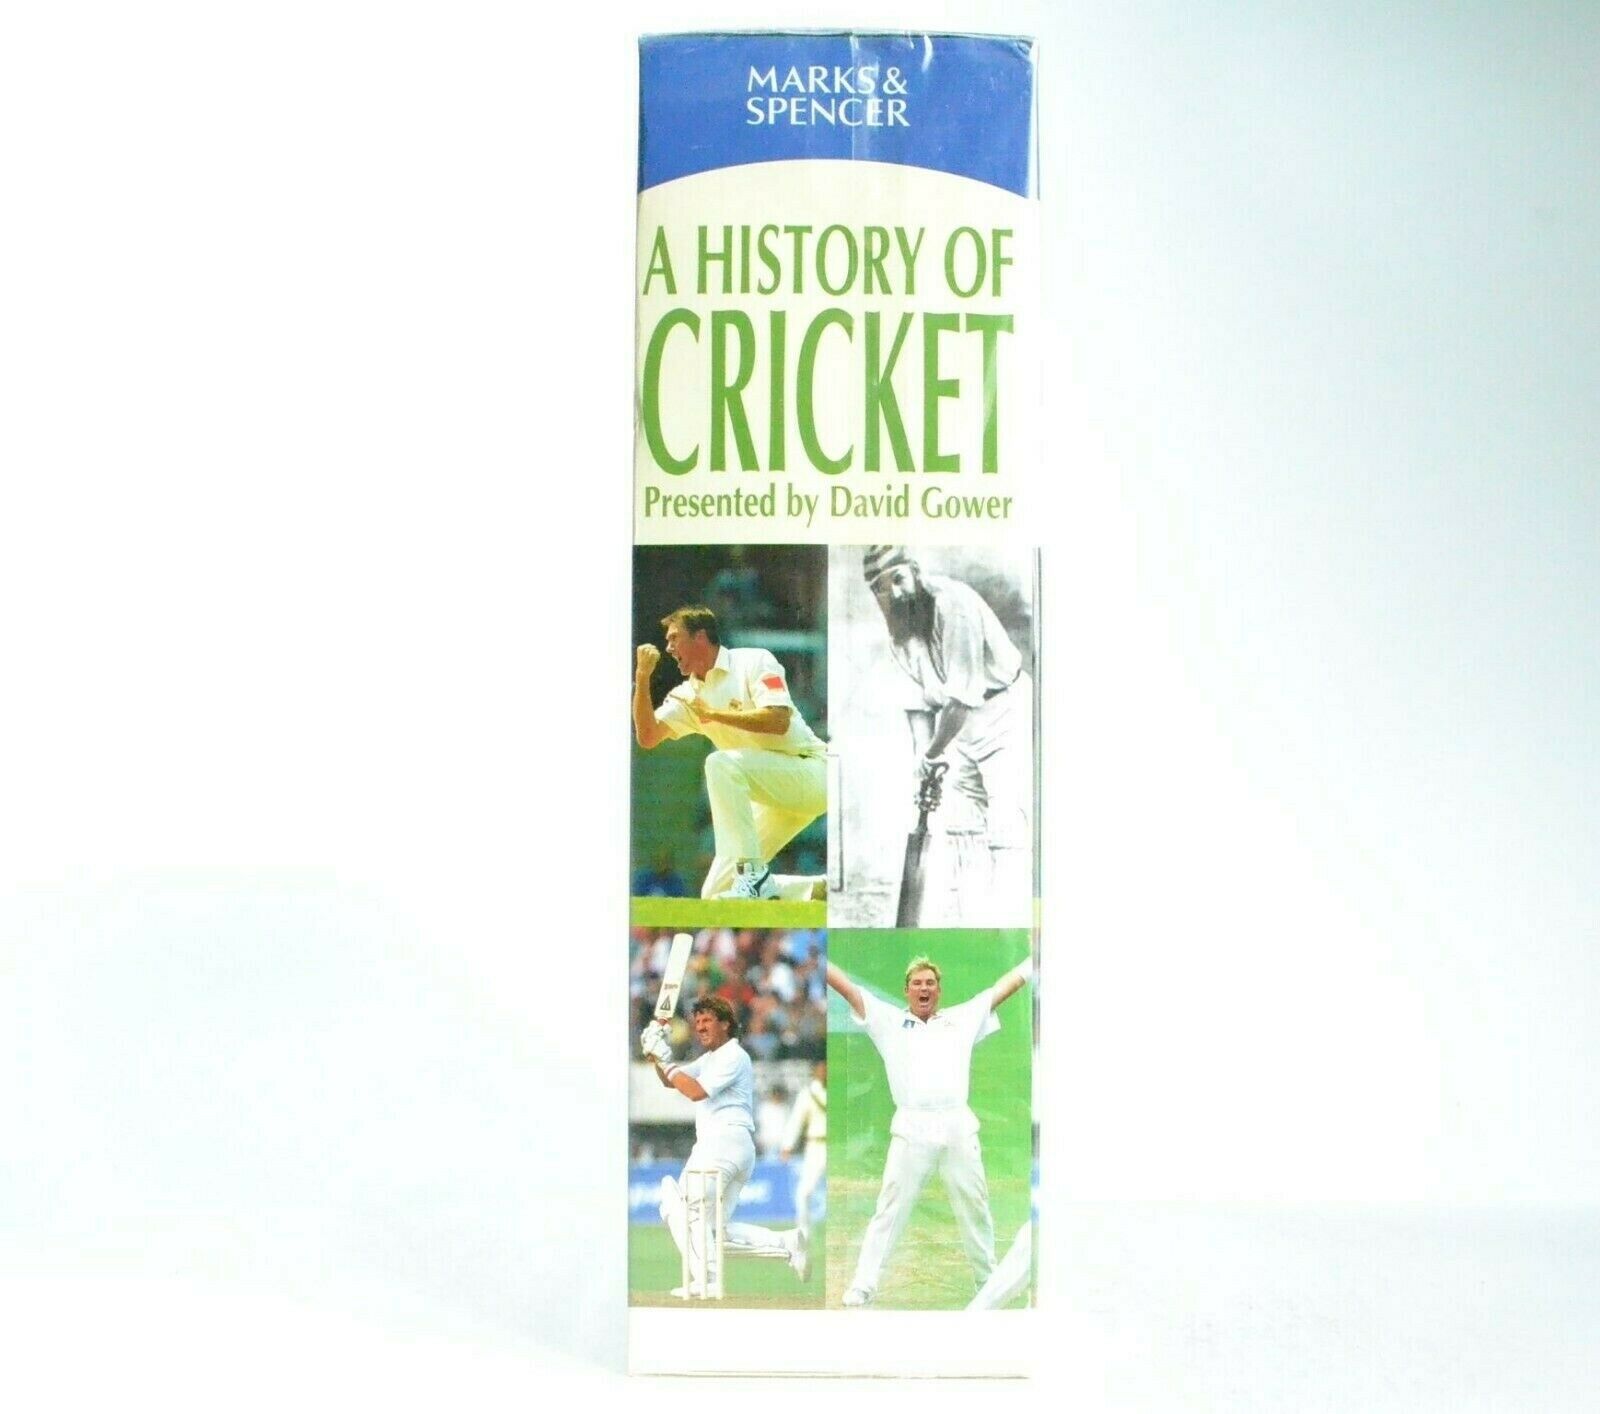 A History Of Cricket - Marks And Spencer - David Gower - Highlights NEW - VHS-